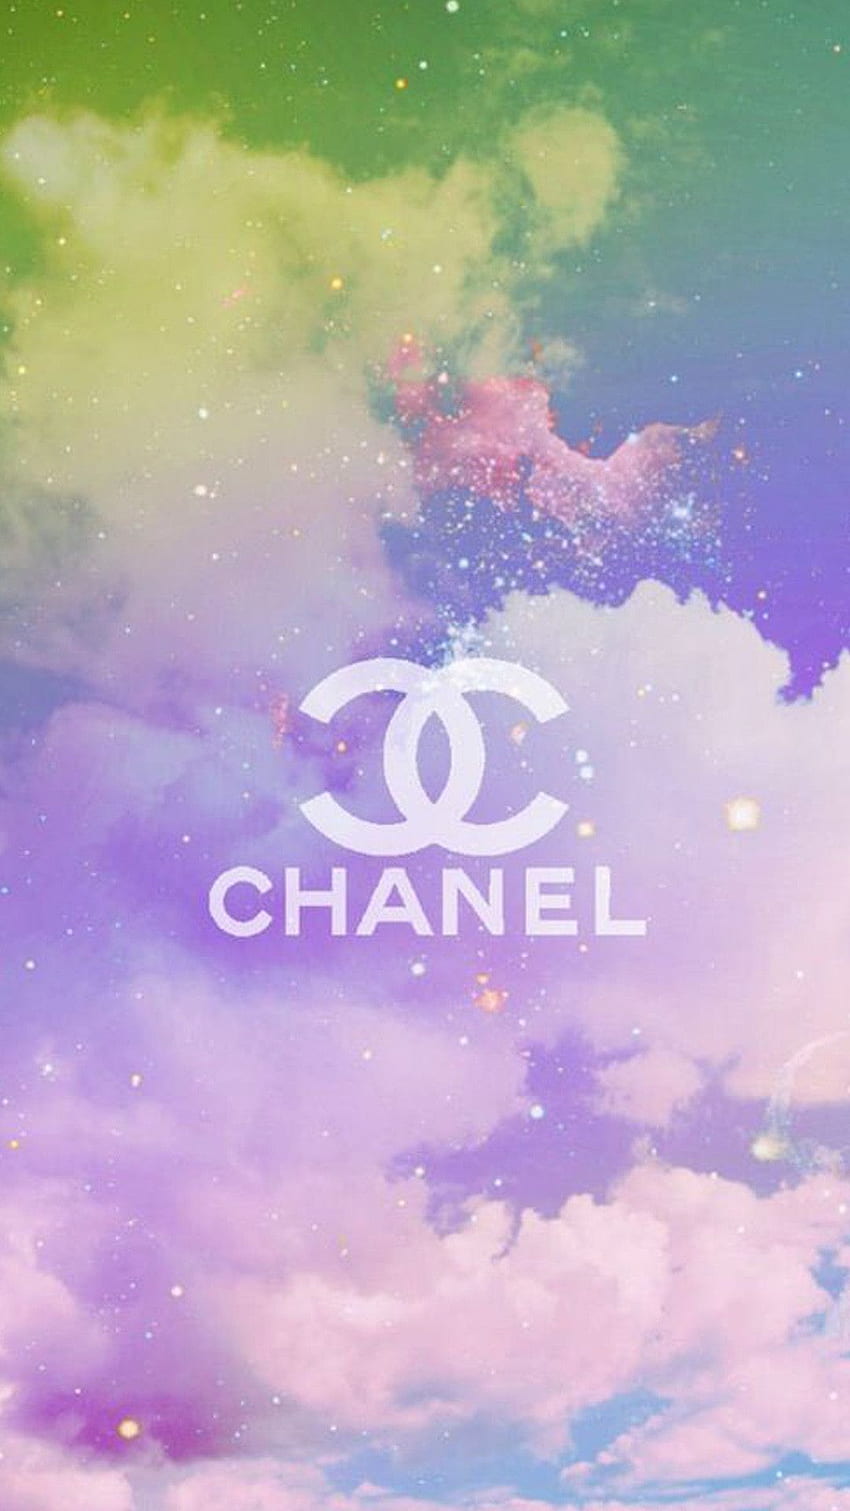 100 Chanel Logo Wallpapers for FREE  Wallpaperscom